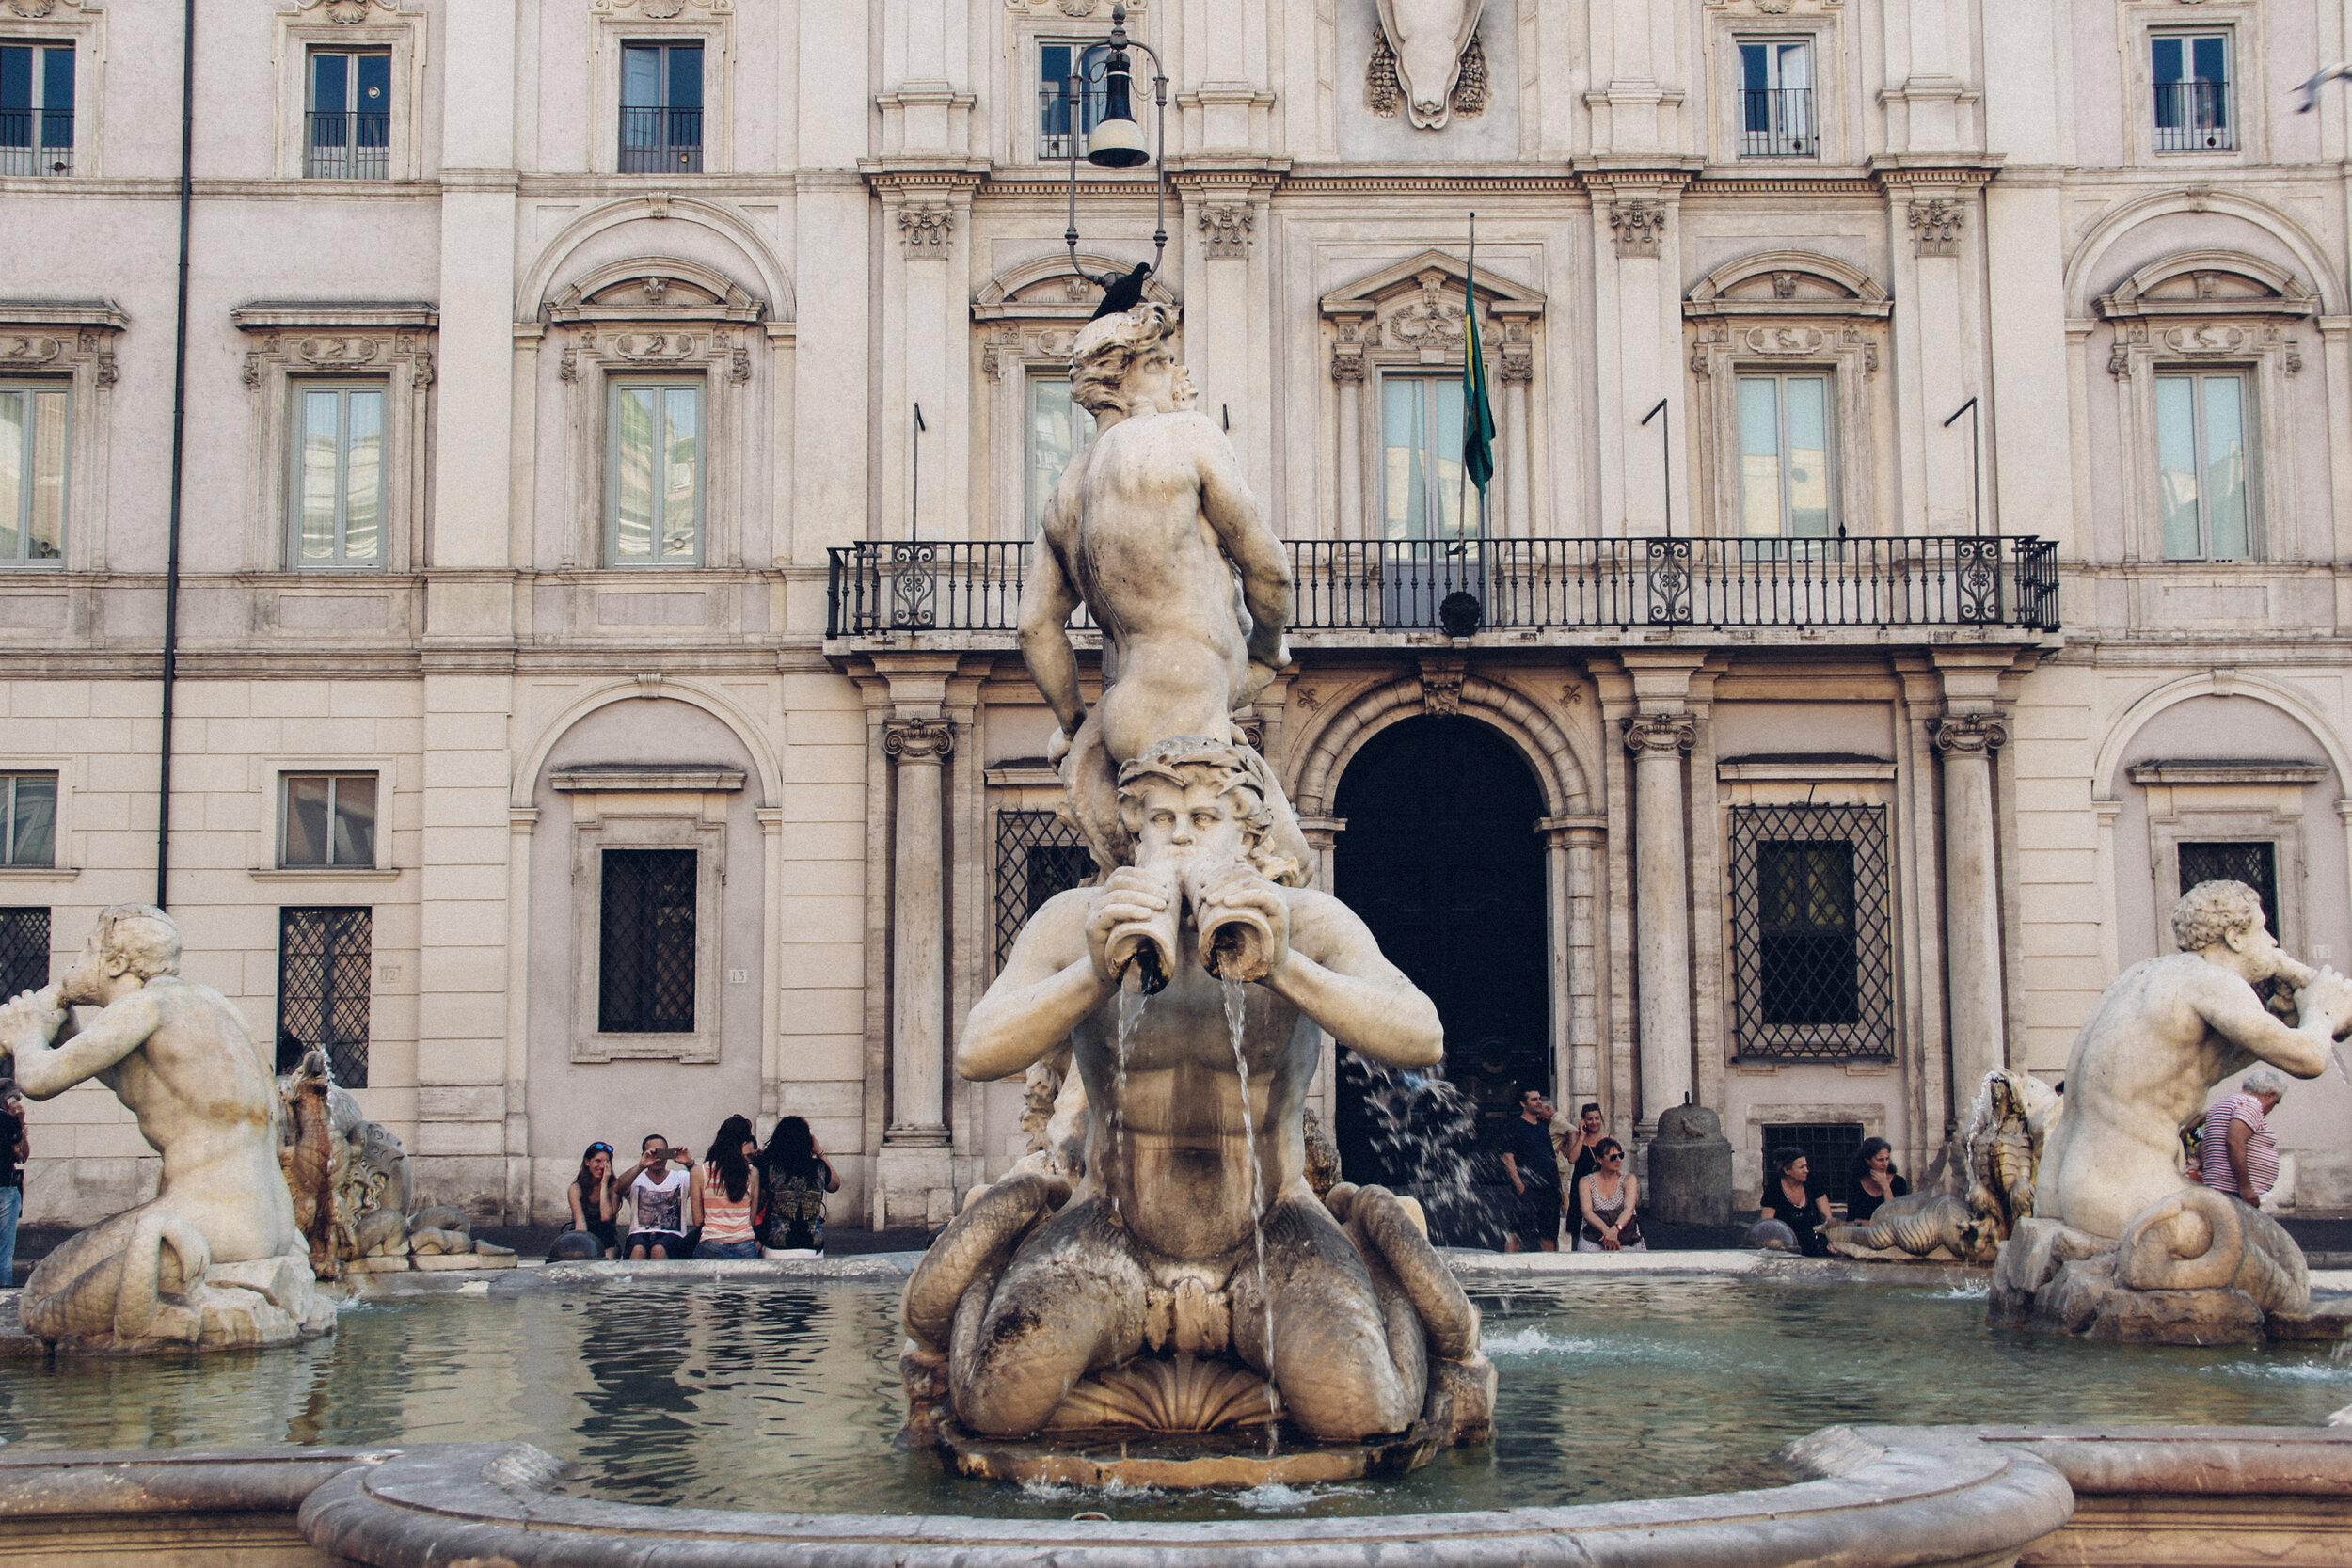  Fontana Del Moro (Moor Fountain), 1654. One of the three fountains found in Piazza Navona. 